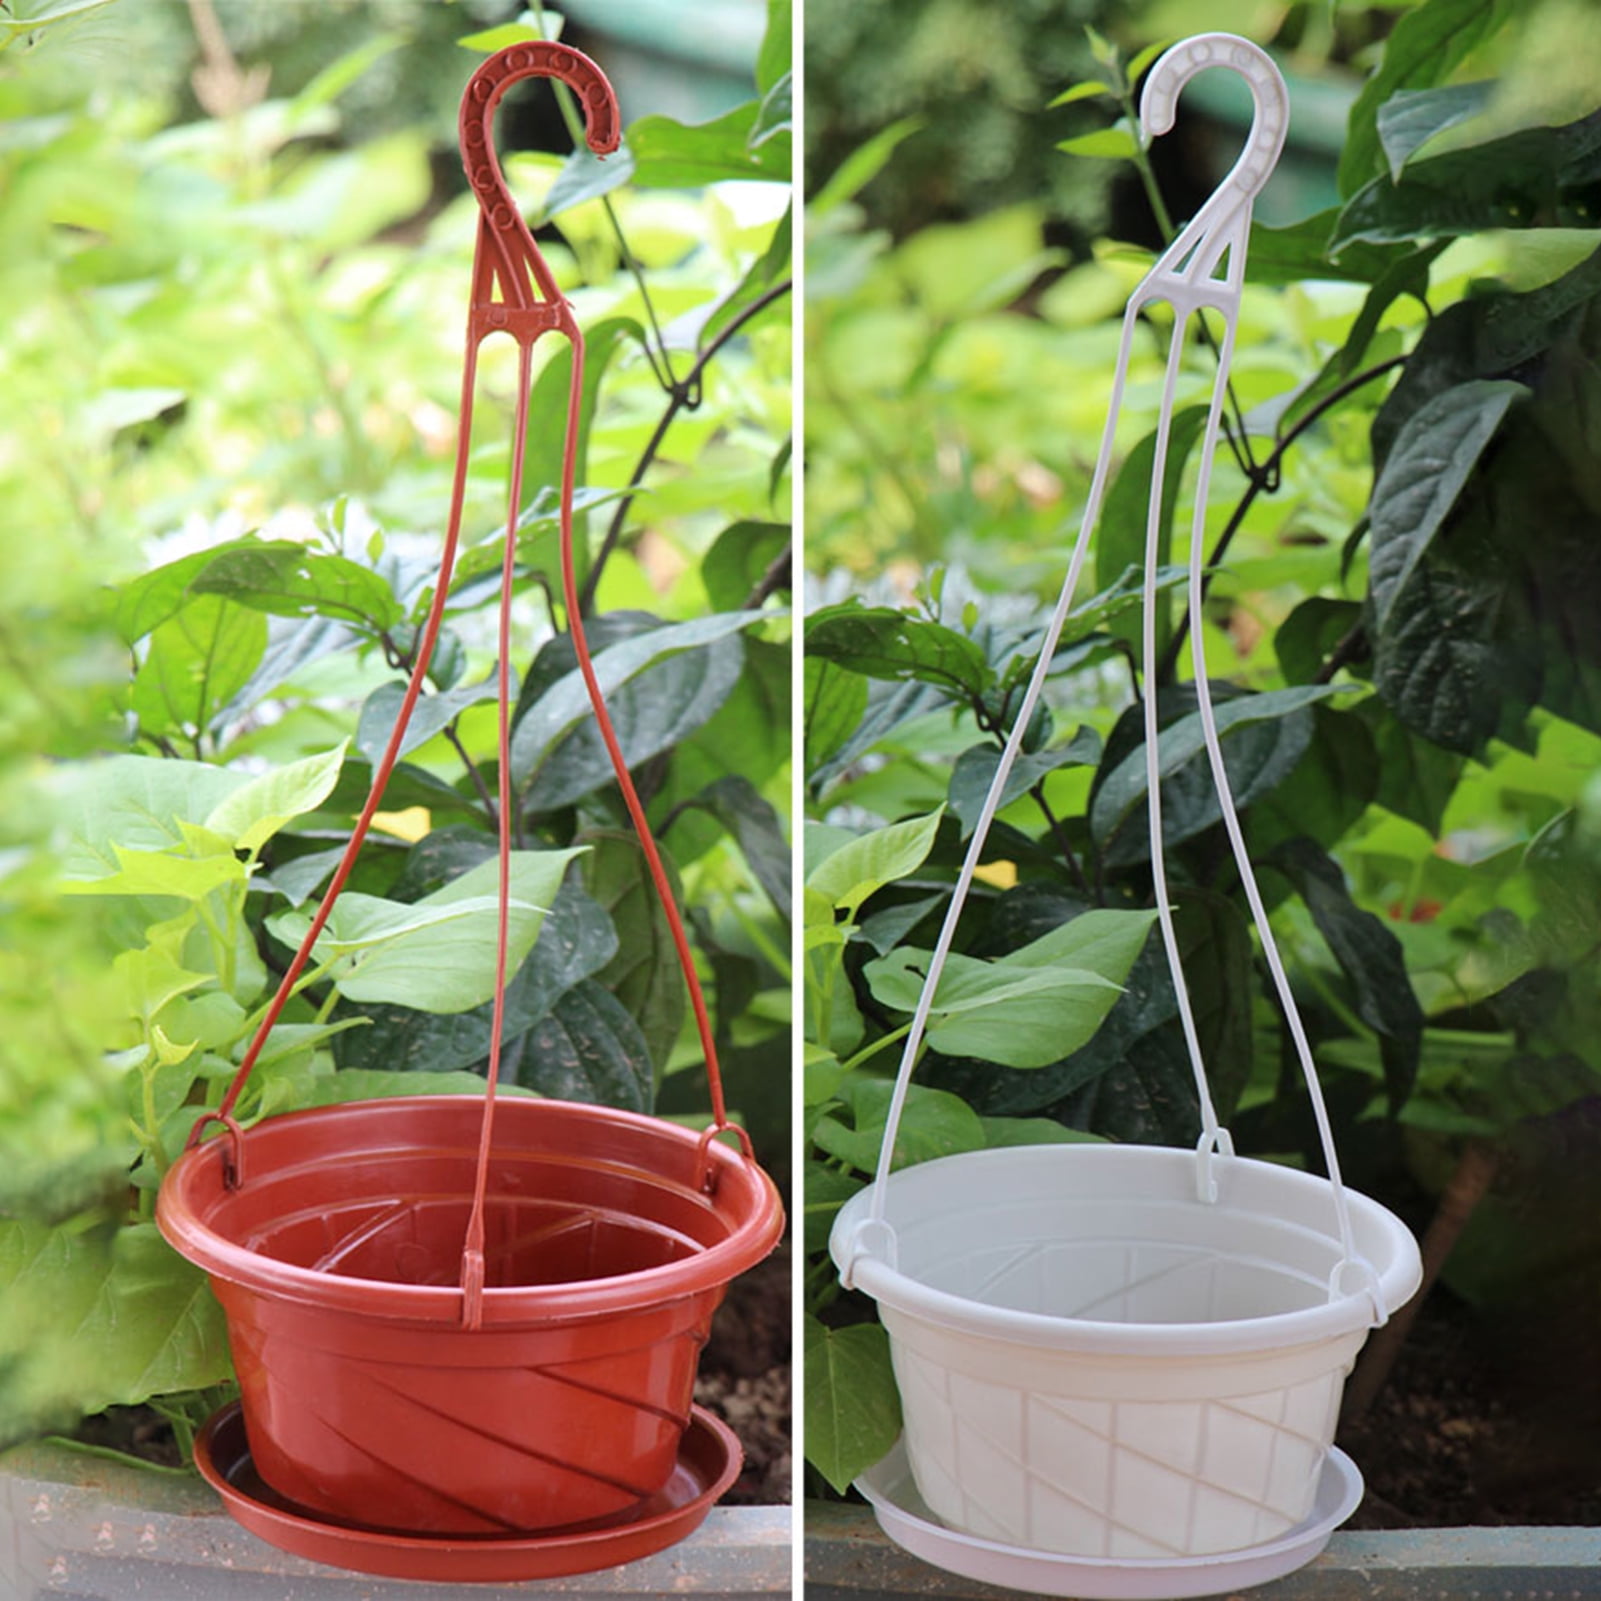 for outdoor or indoor decoration-2 pieces Hanging plastic flowerpot basket plant hanging basket with chain hook